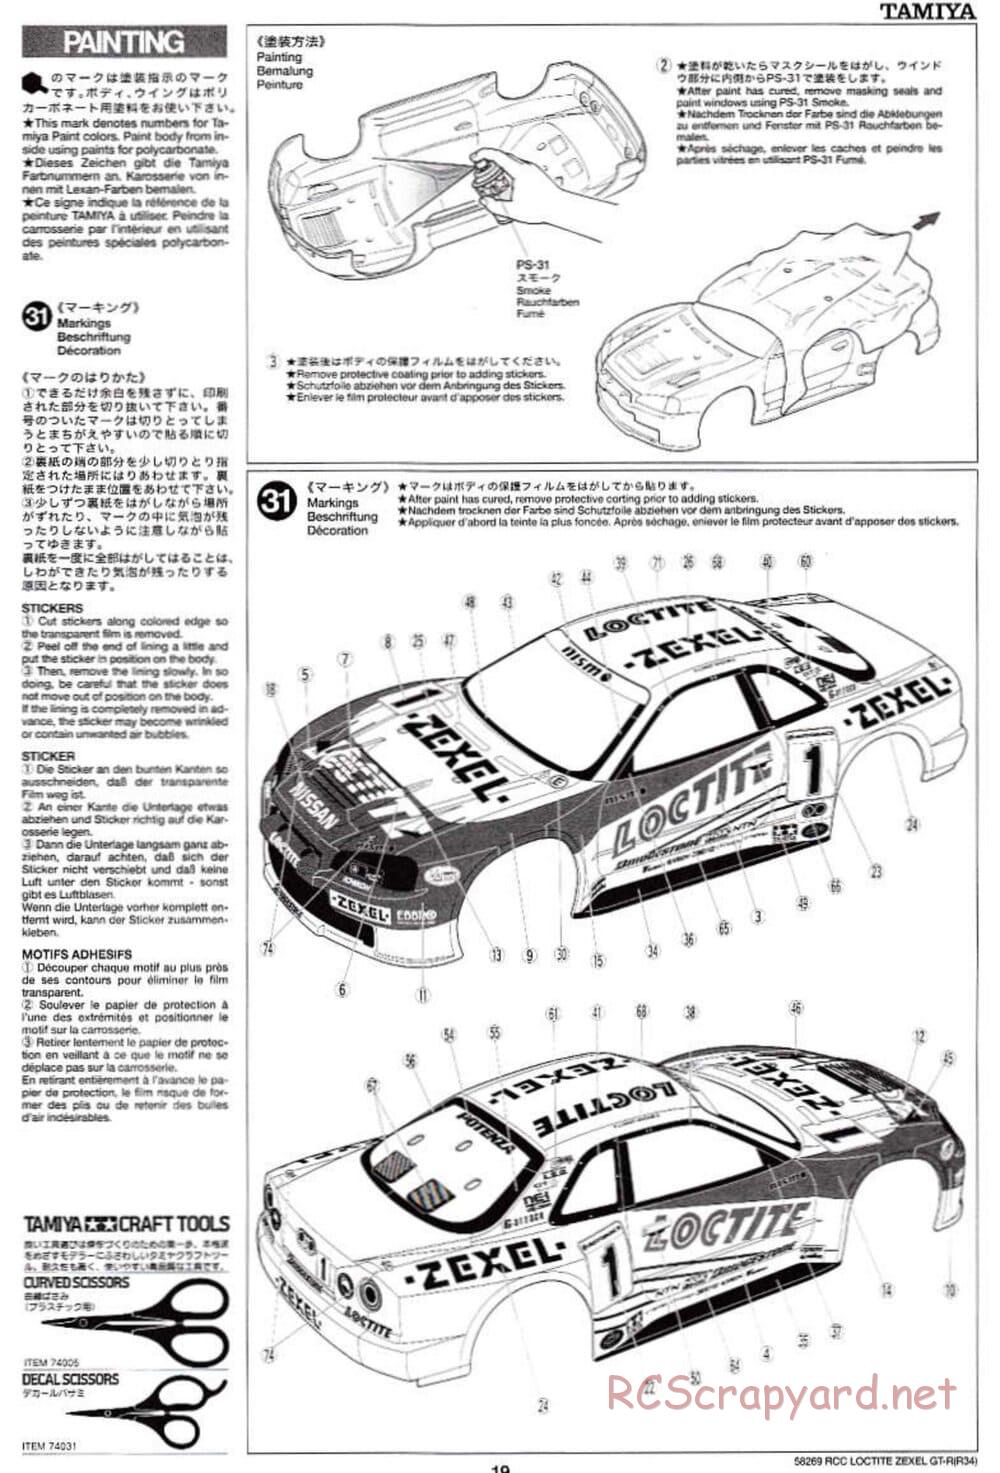 Tamiya - Loctite Zexel Skyline GT-R (R34) - TA-04 Chassis - Manual - Page 19